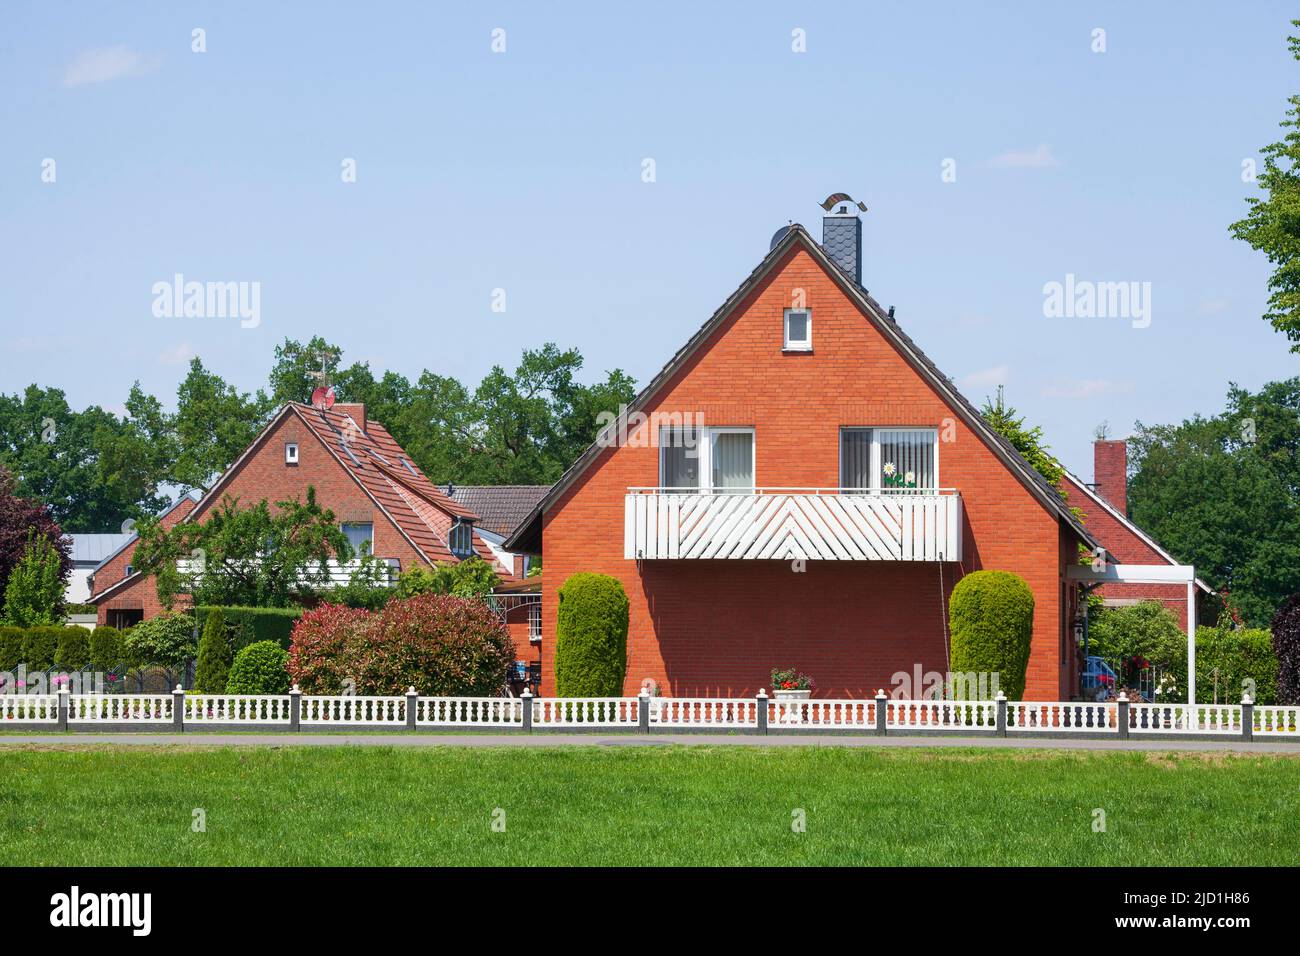 Single-family house, residential building, Rehden, Lower Saxony, Germany Stock Photo